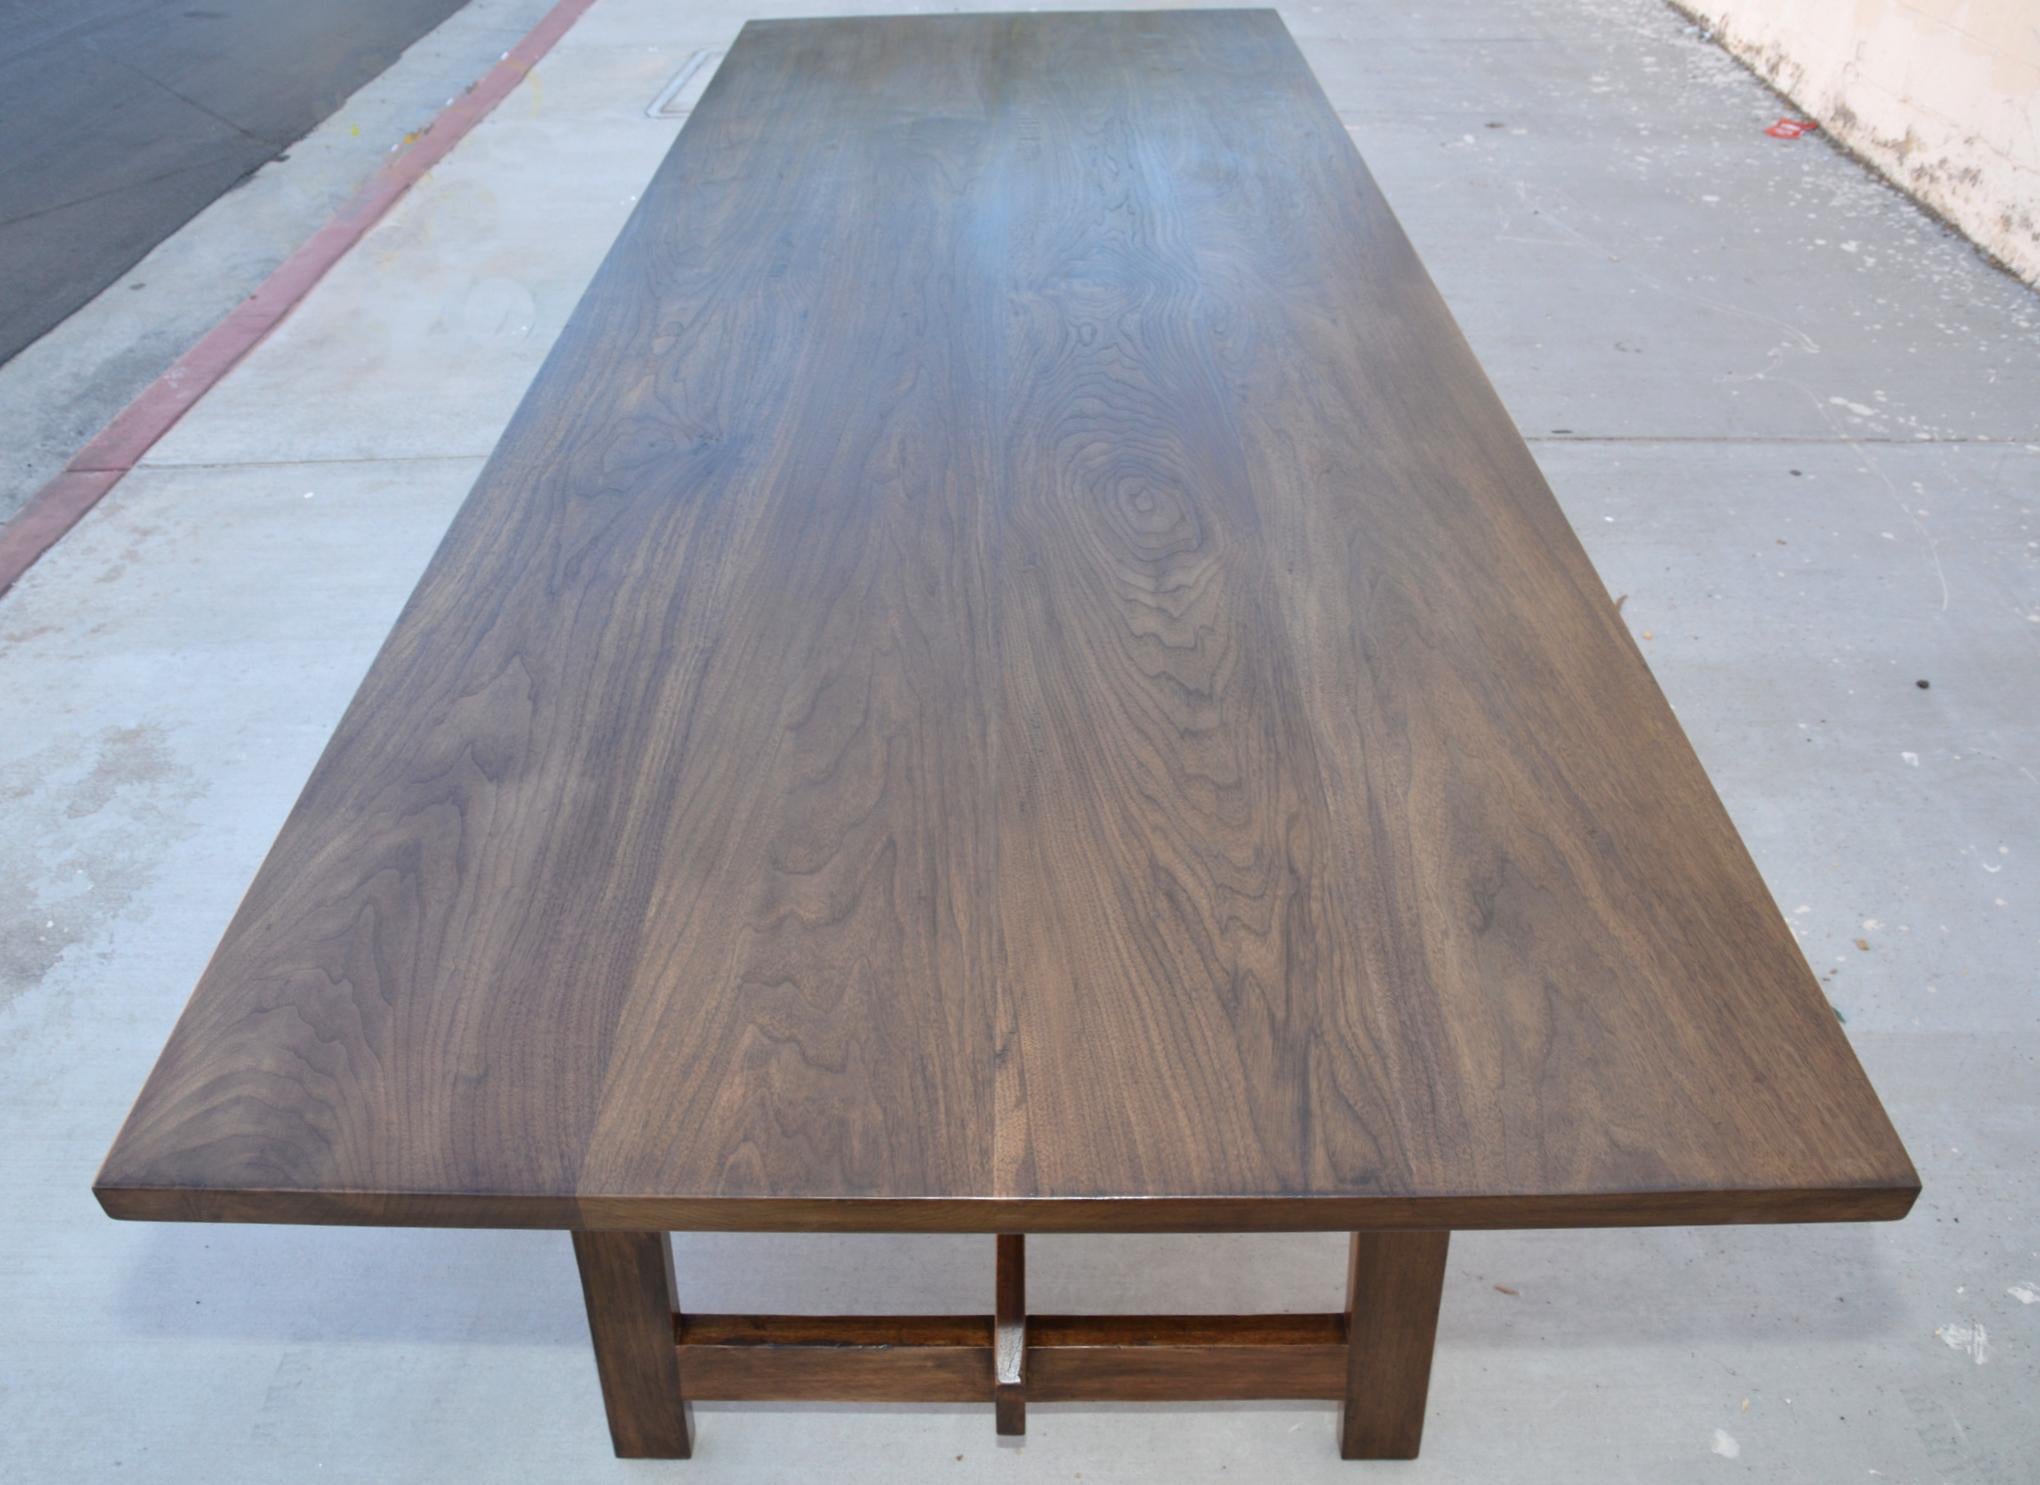 This custom walnut dining table is seen here in 120